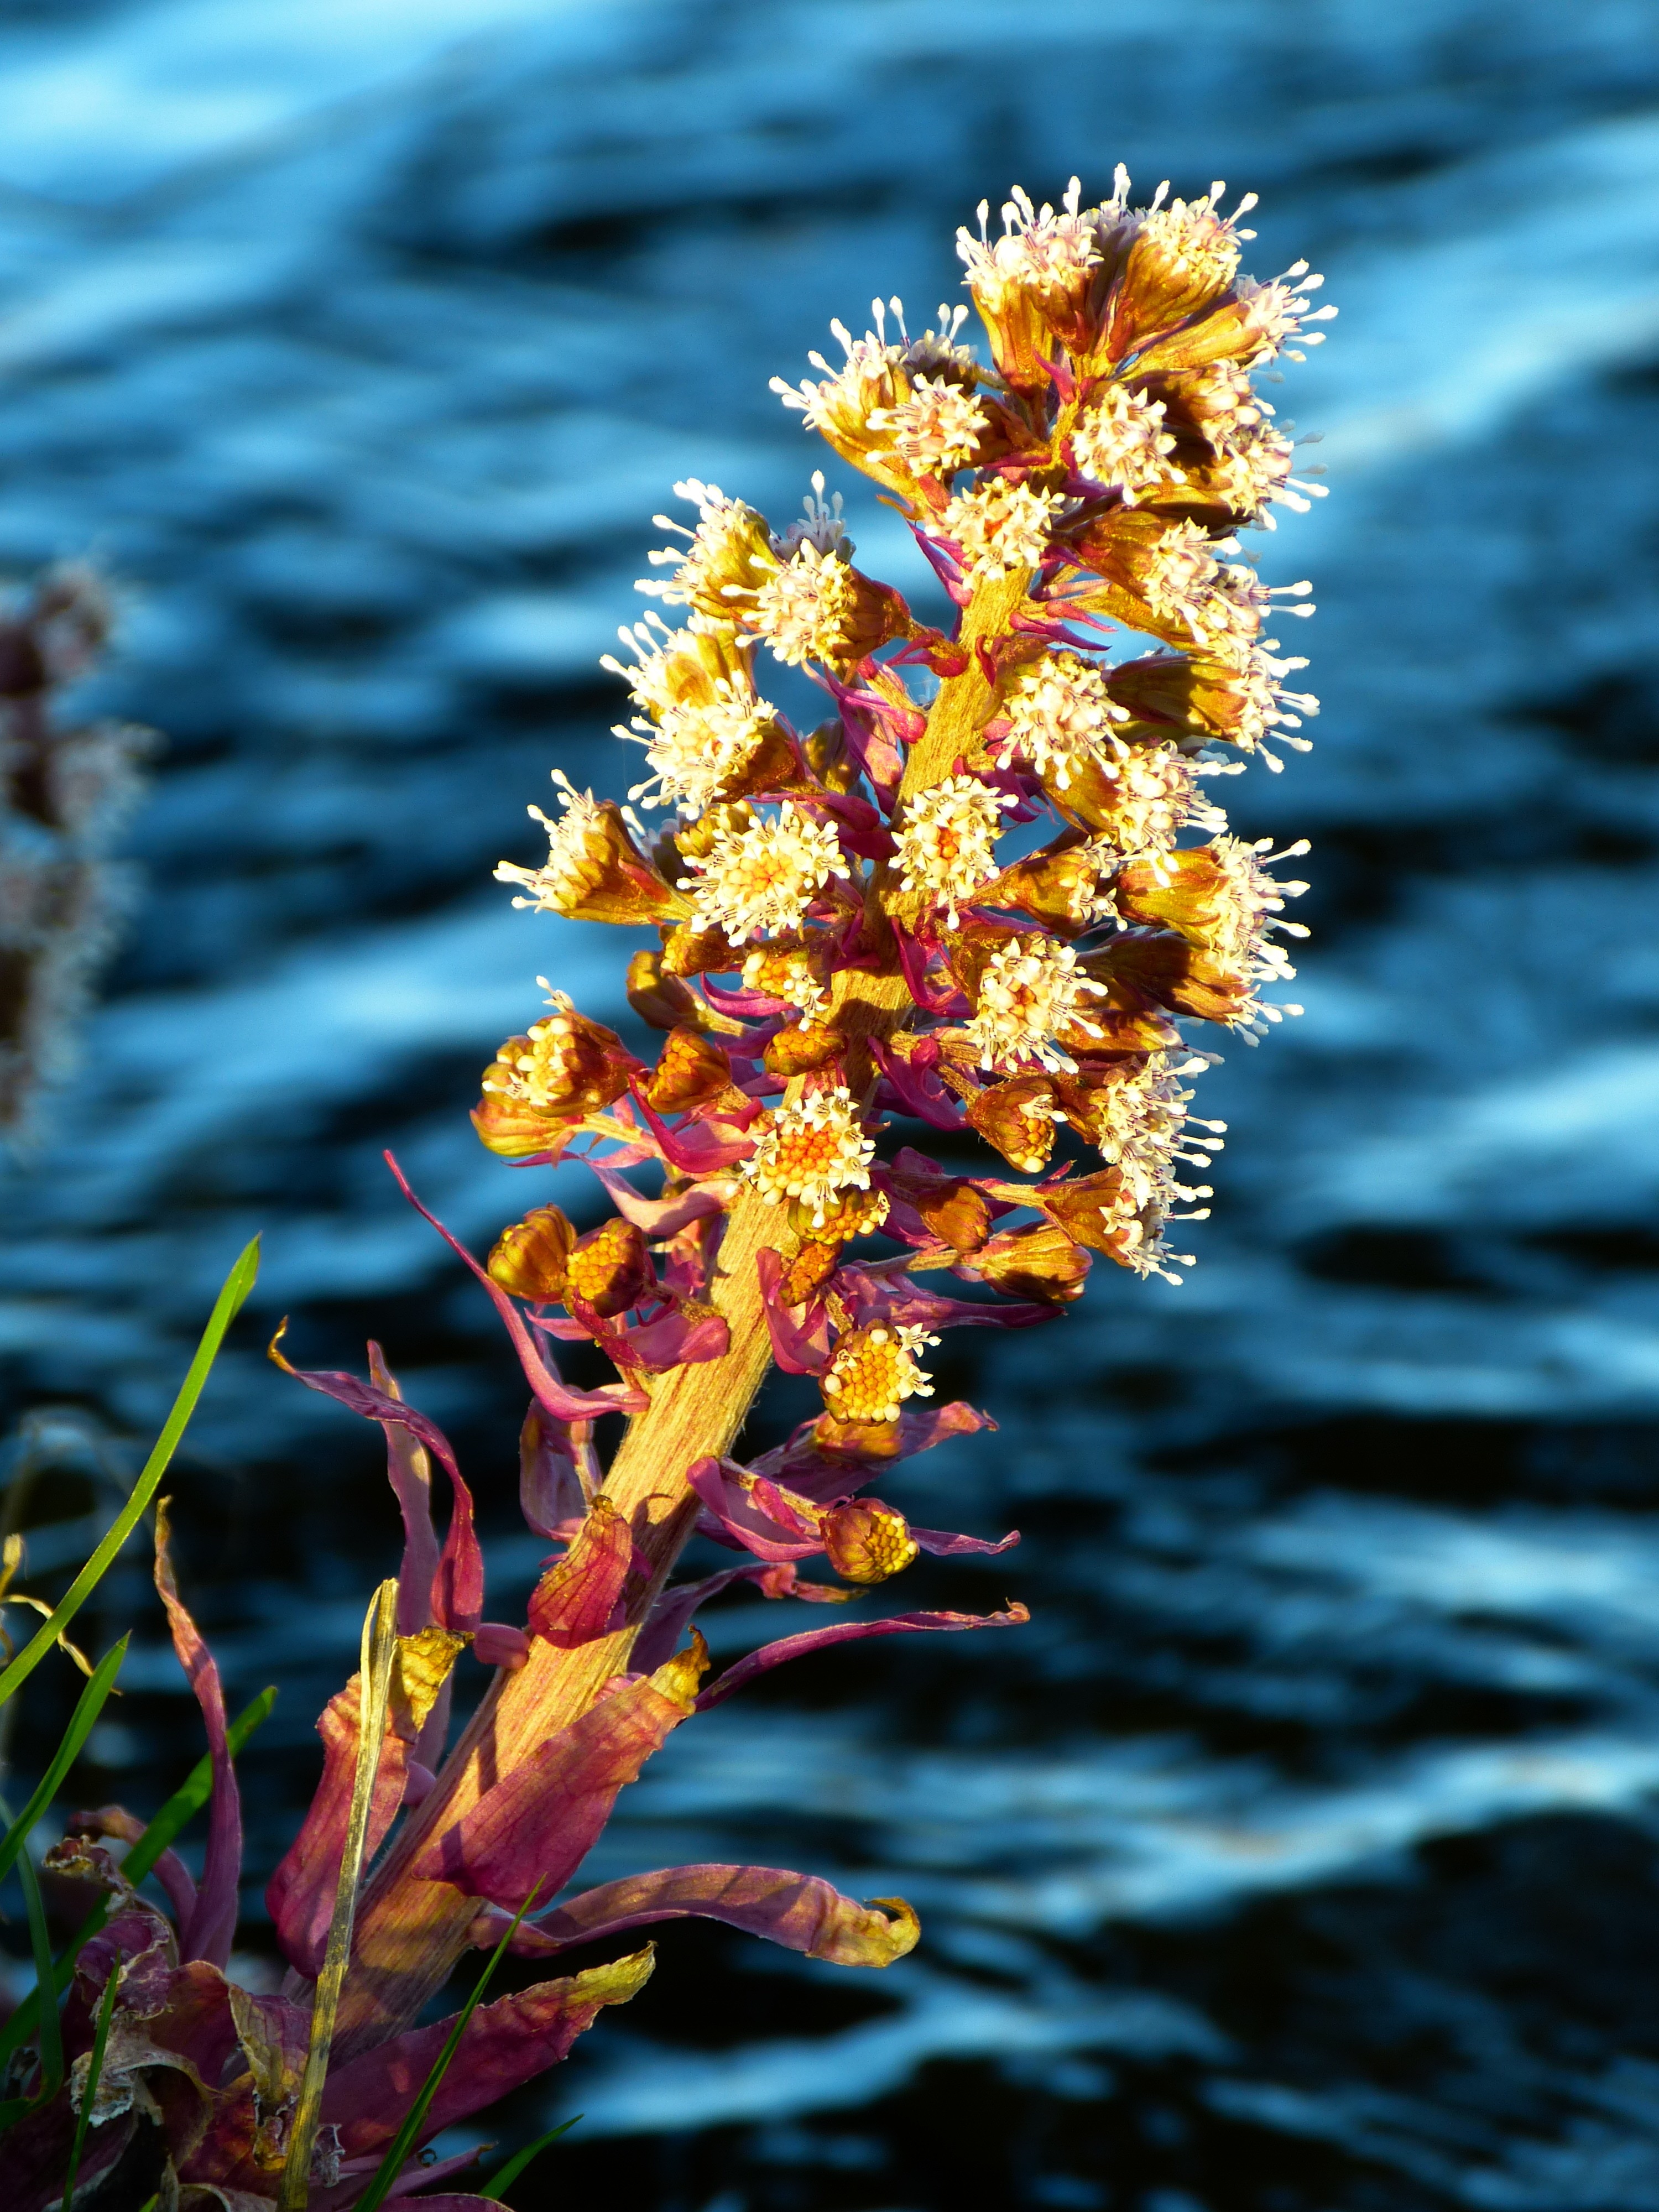 yellow and white flowering plant near the body of water